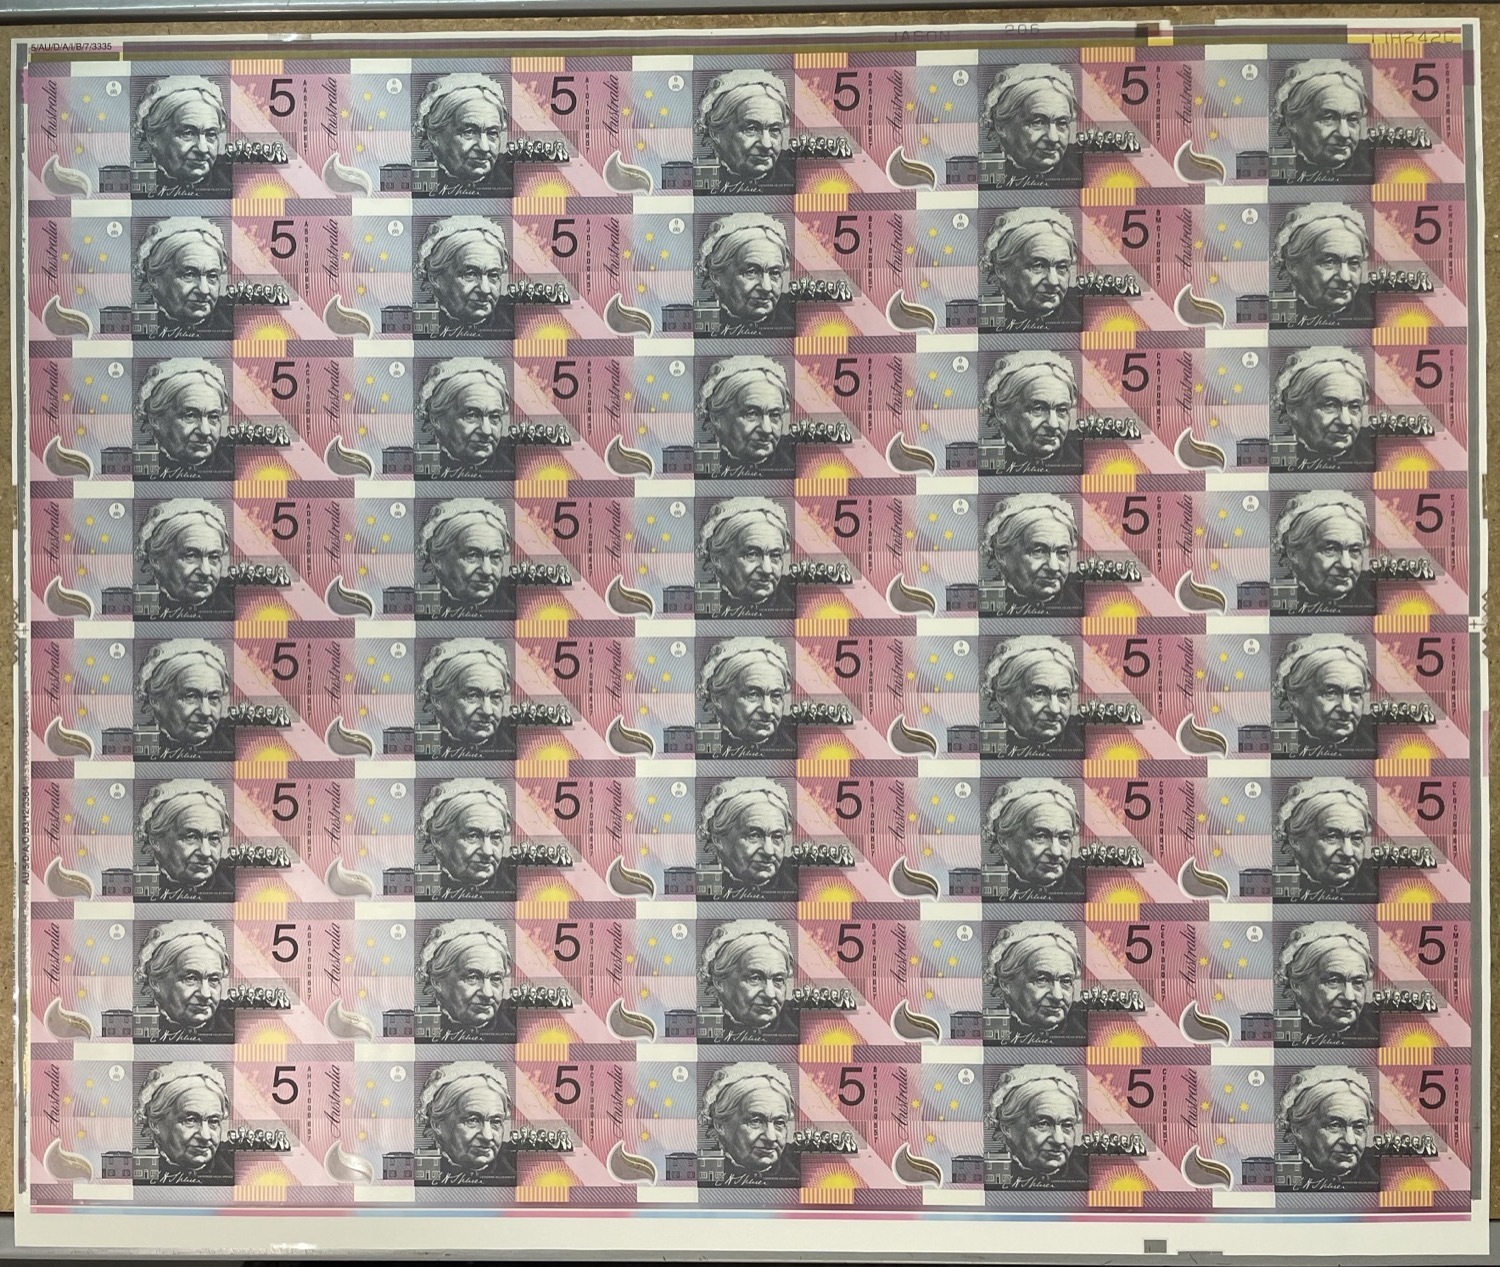 2001 5 Dollar Uncut Sheet of 40 Notes Federation product image